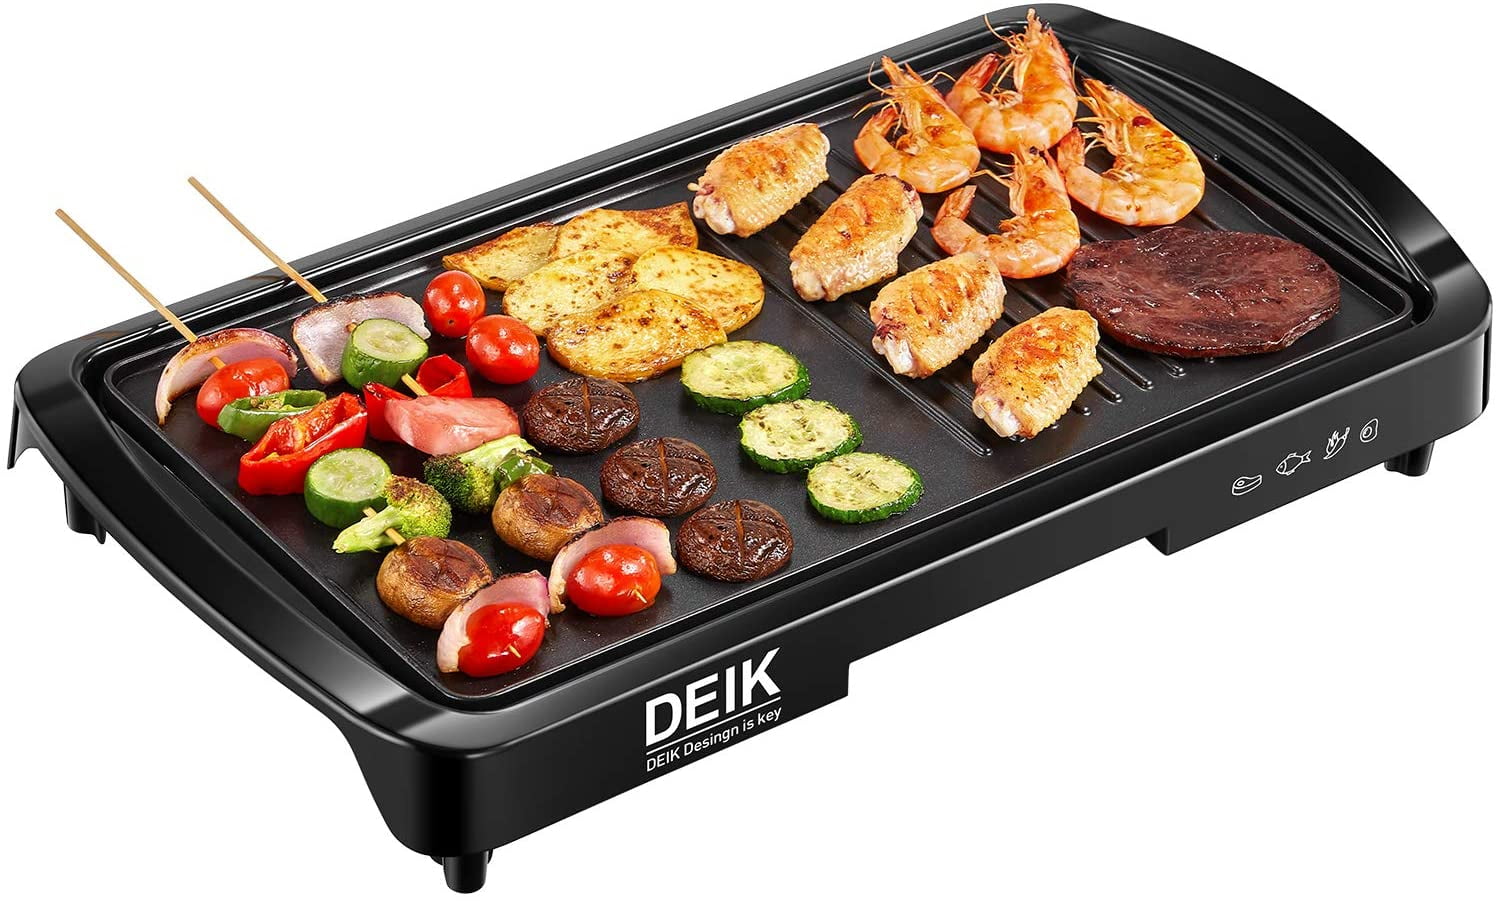 Black 14.5 x 9 Inch Surface Drip Tray 1400W Smokeless Grill Griddle Removable Non-Stick Disc Table Top Grill with Tempered Glass Lid Electric Grill